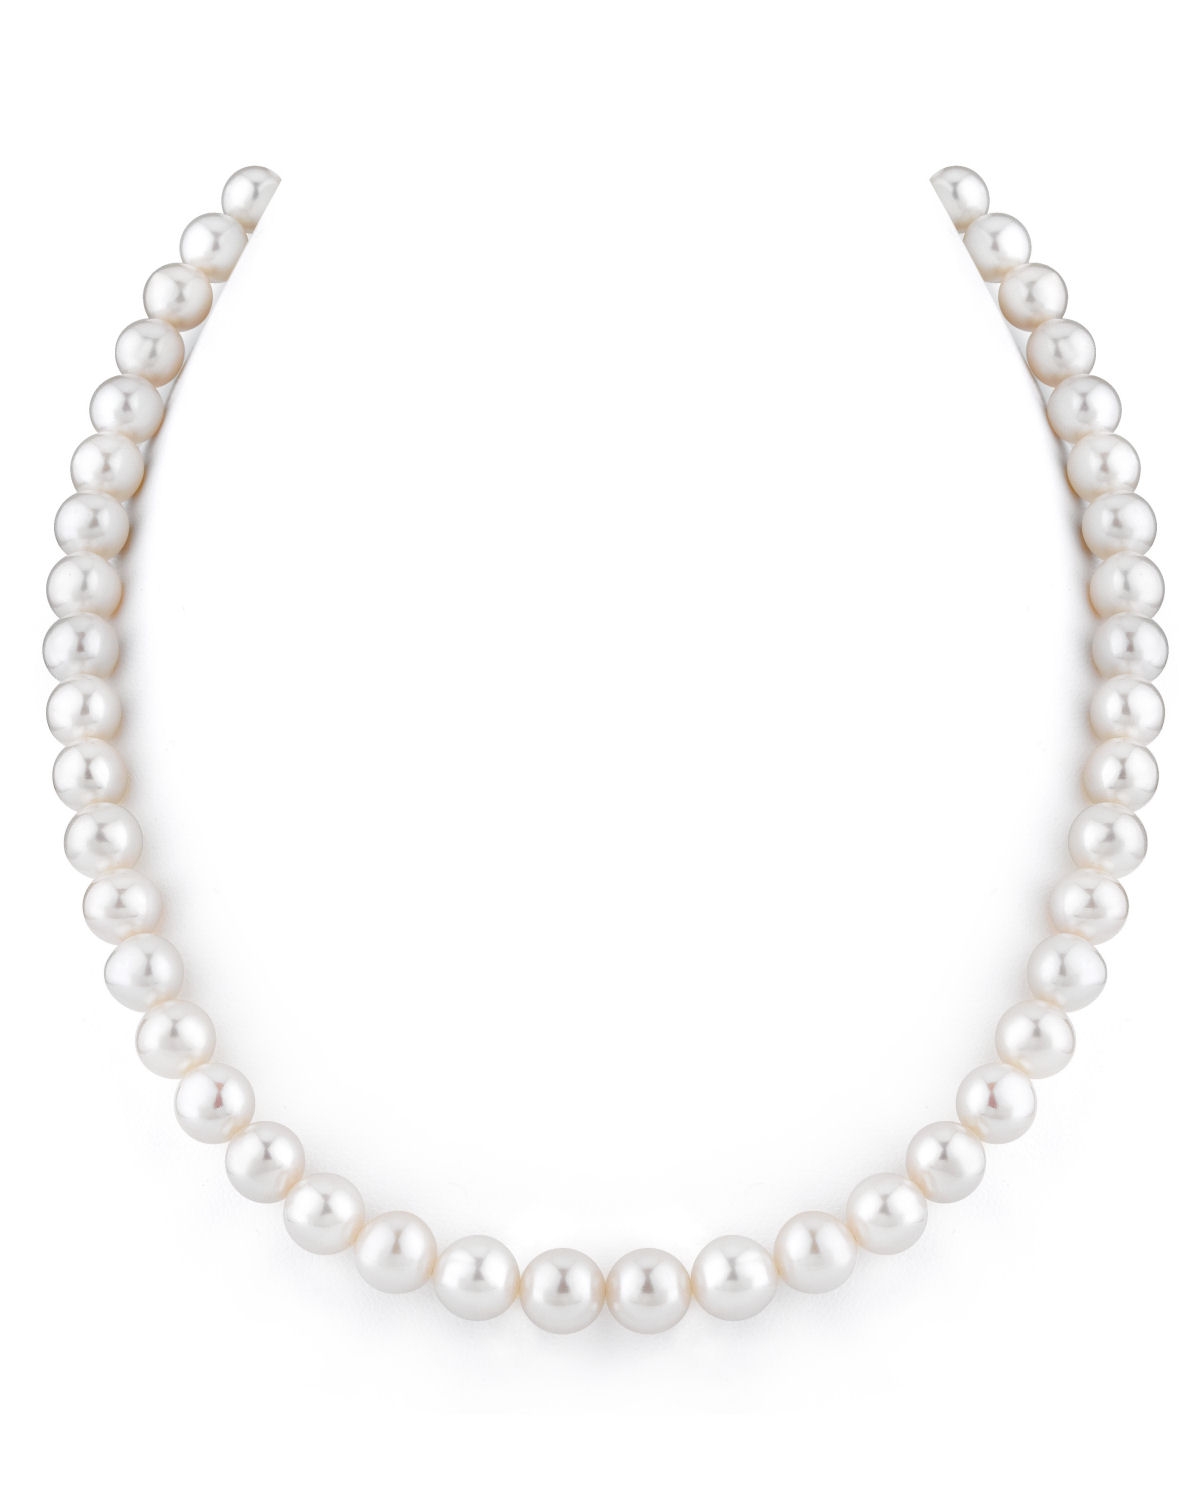 Pearls clipart pearl chain. Necklace clip art library